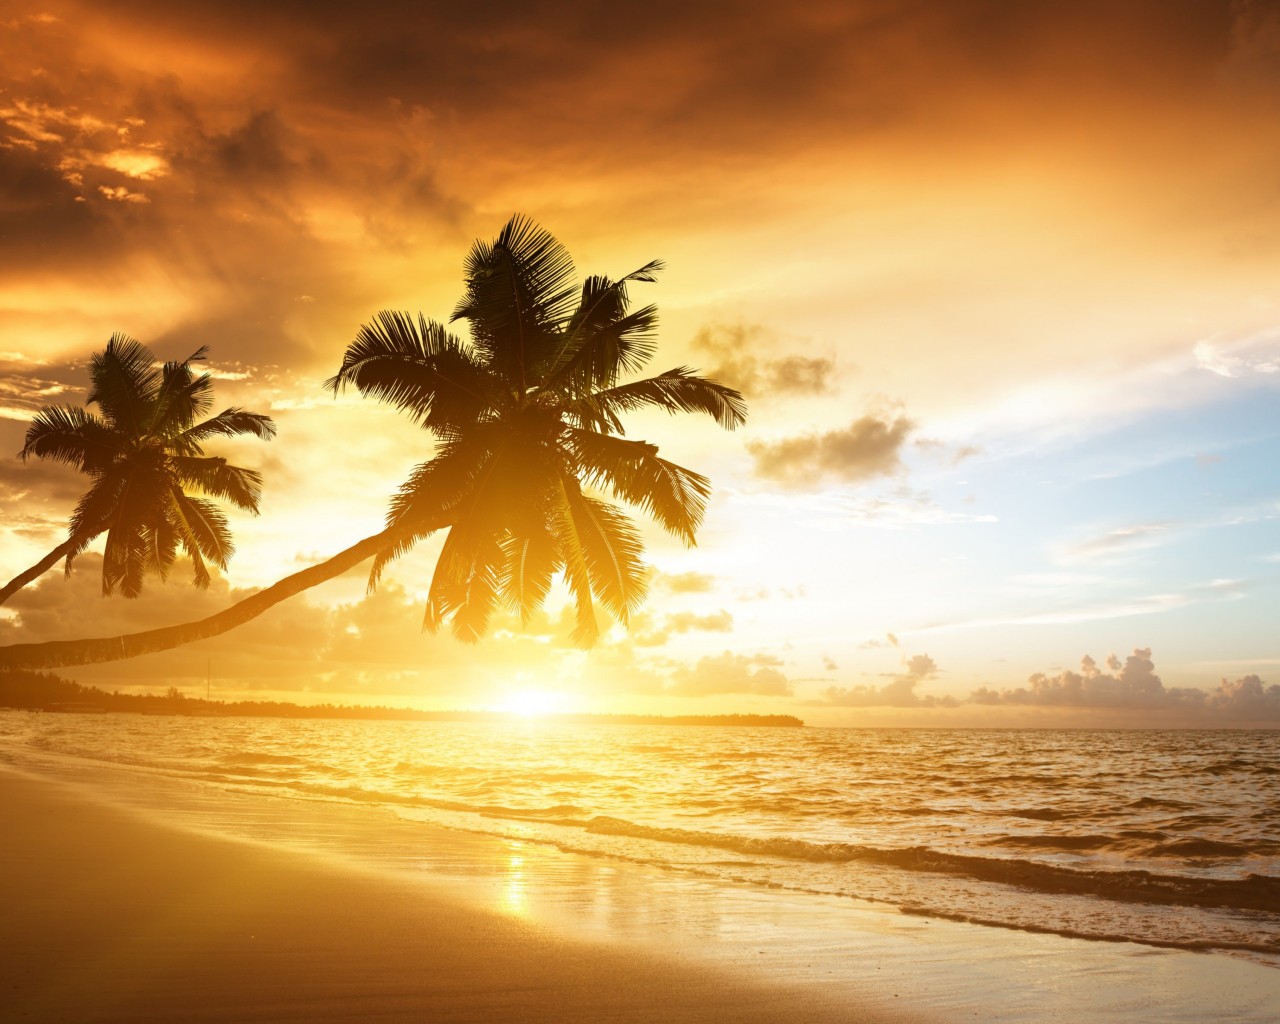 Beach With Palm Trees At Sunset Wallpaper for Desktop 1280x1024